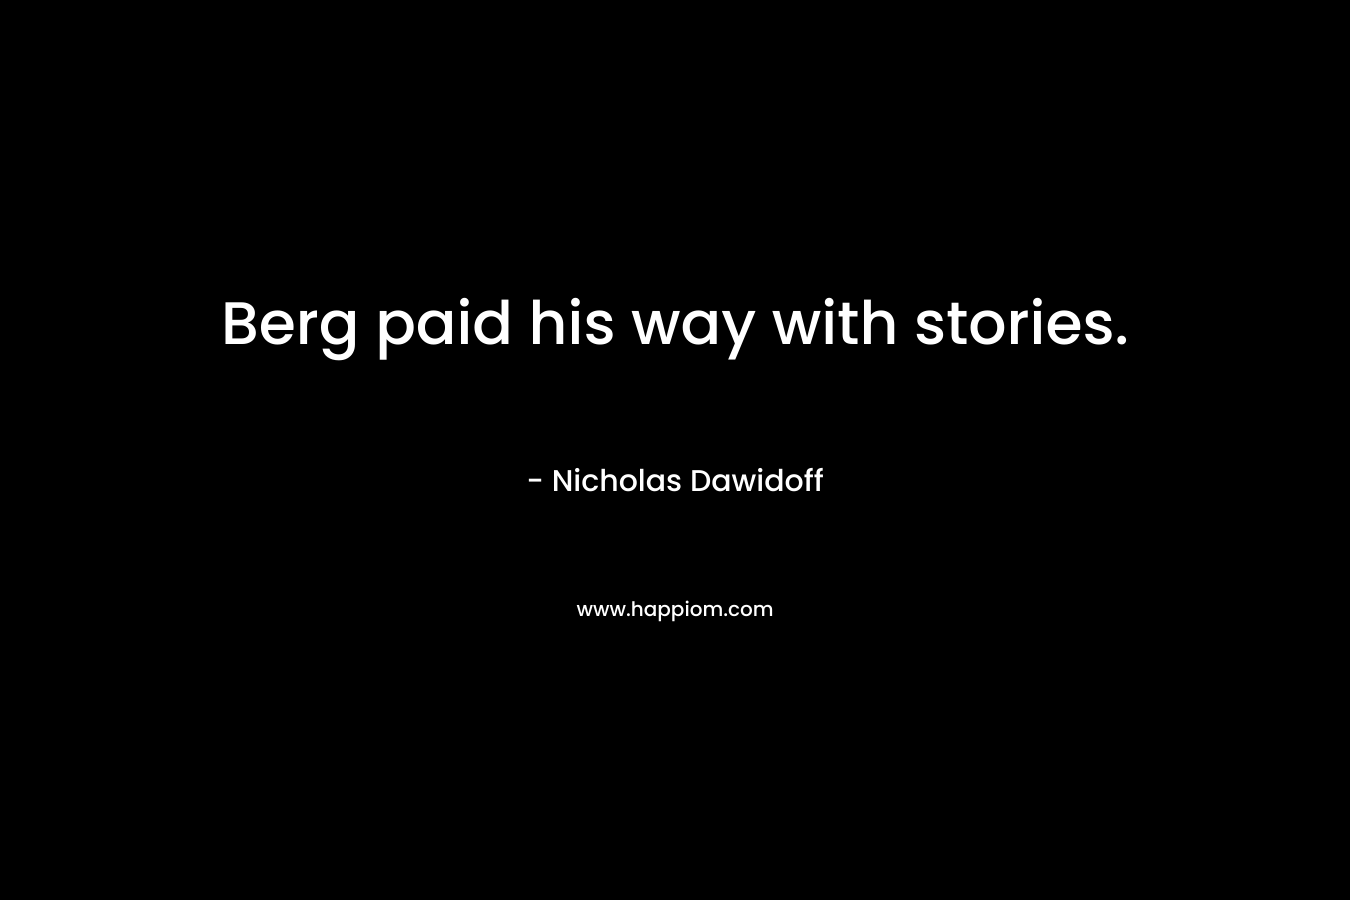 Berg paid his way with stories.